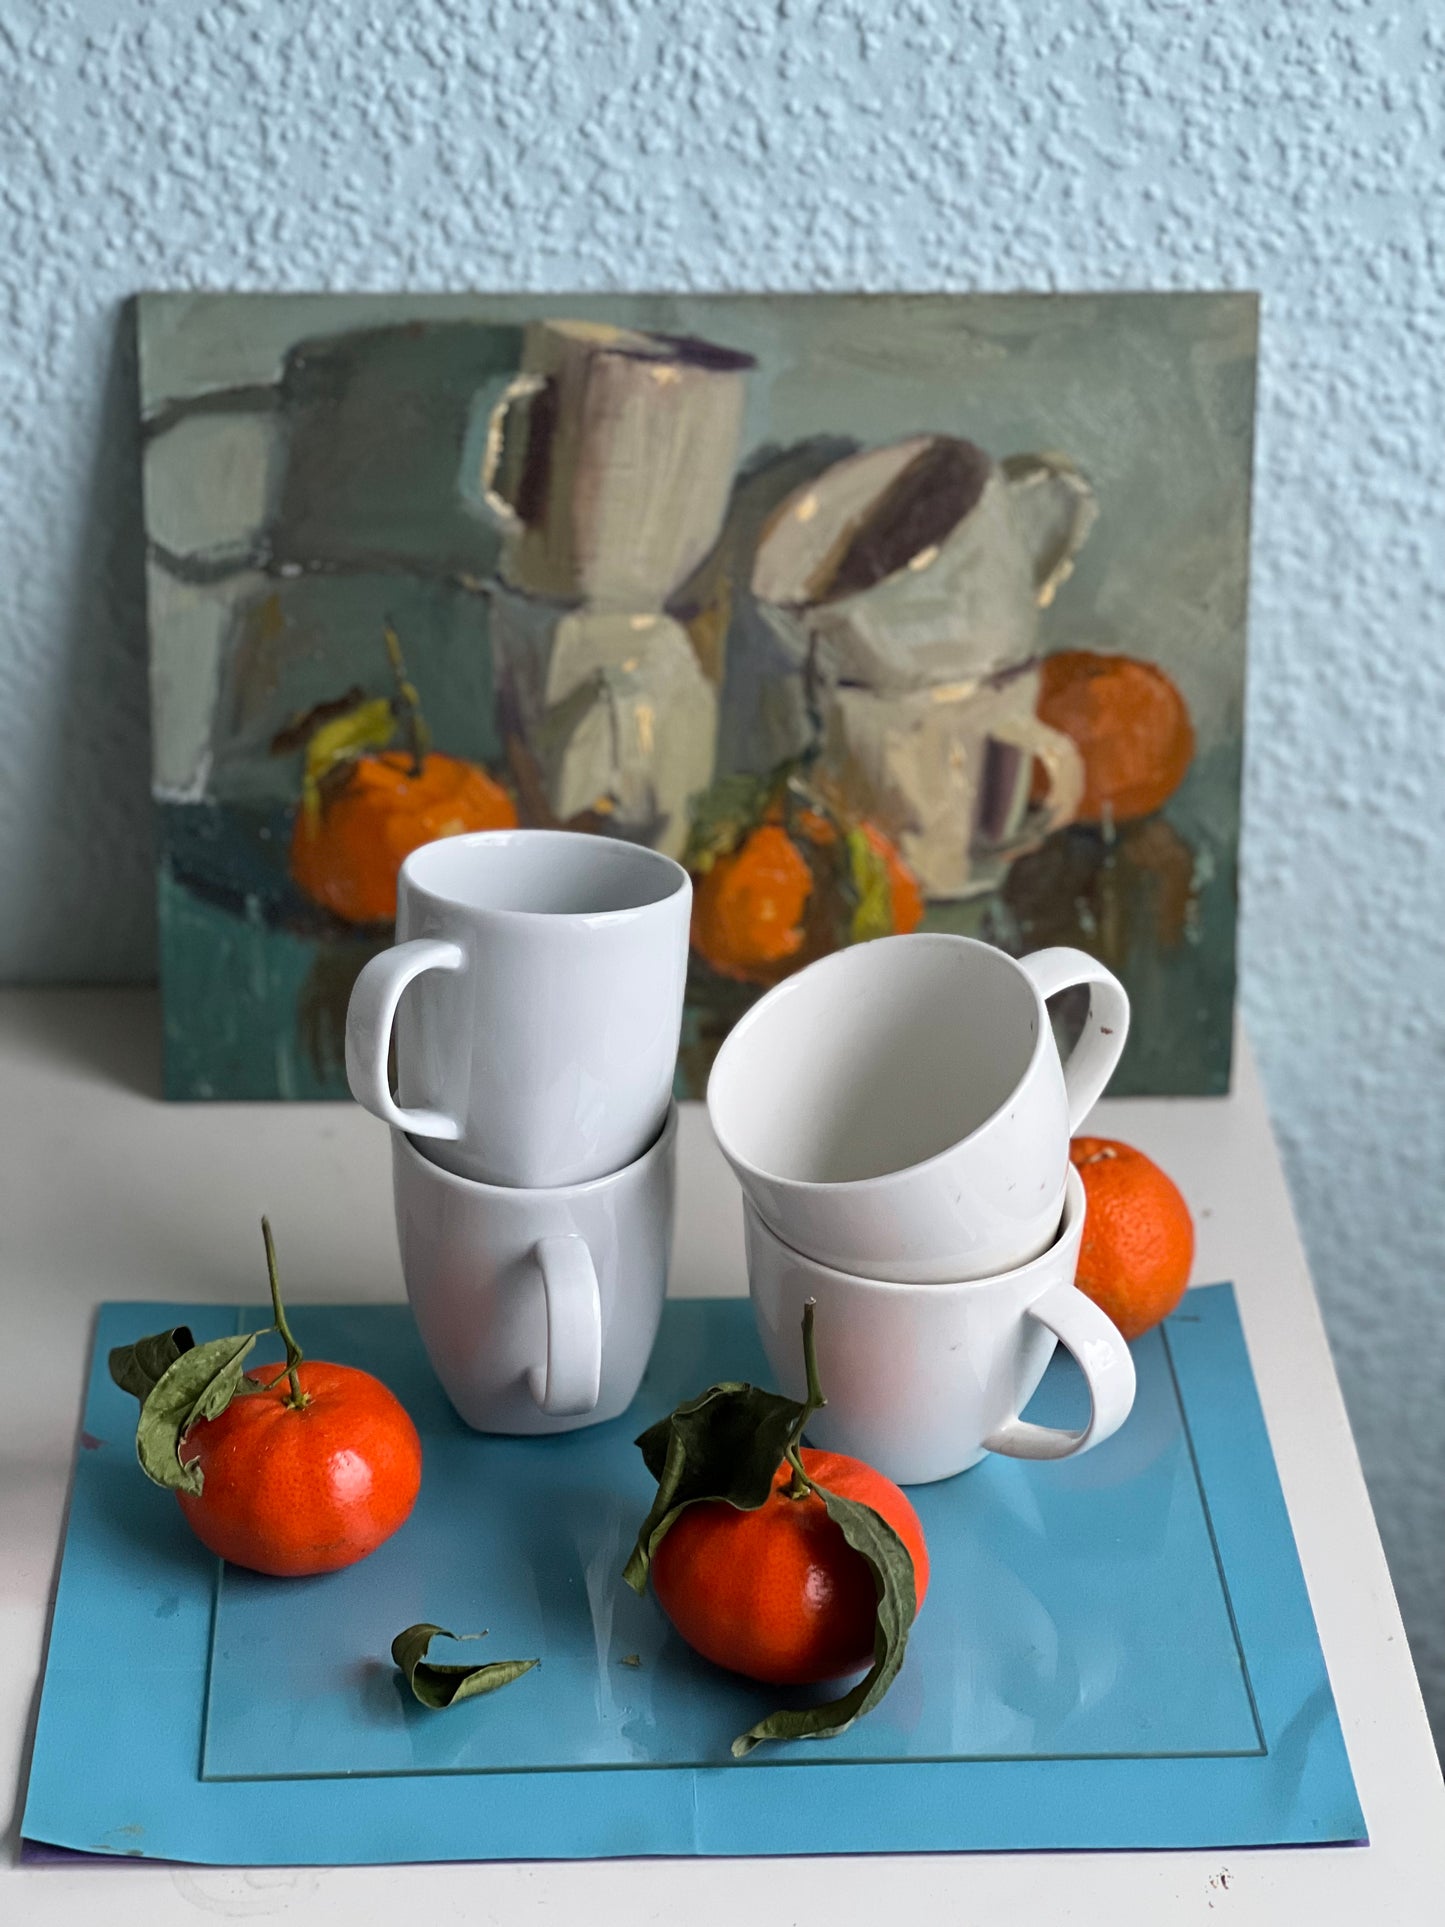 Oranges and Teacups - Still Life Oil Painting